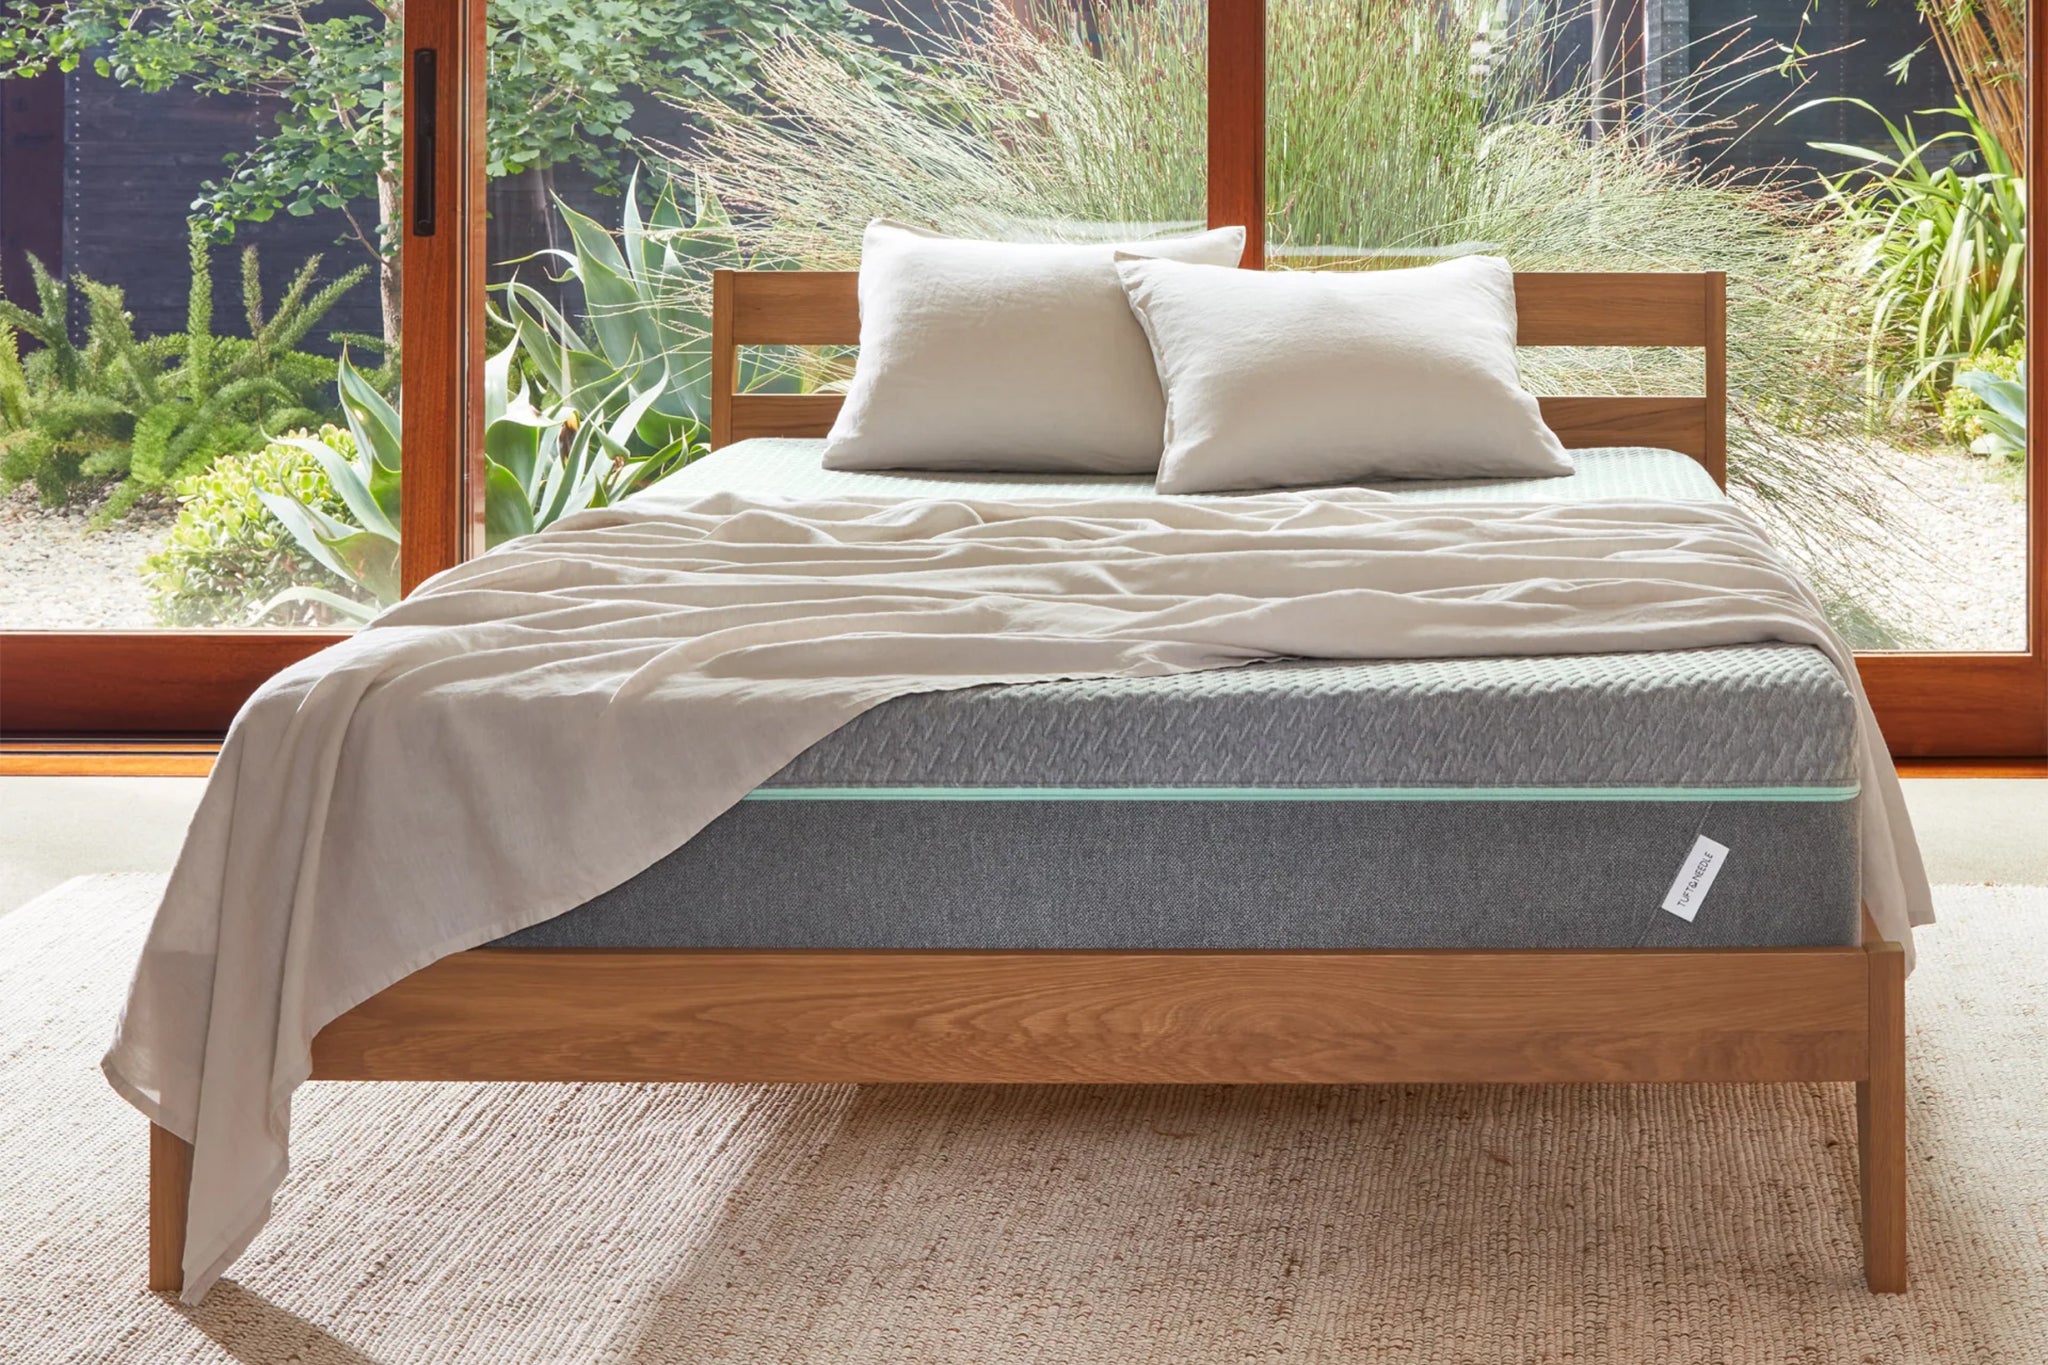 Different types of bed frames: metal, wooden, and upholstered